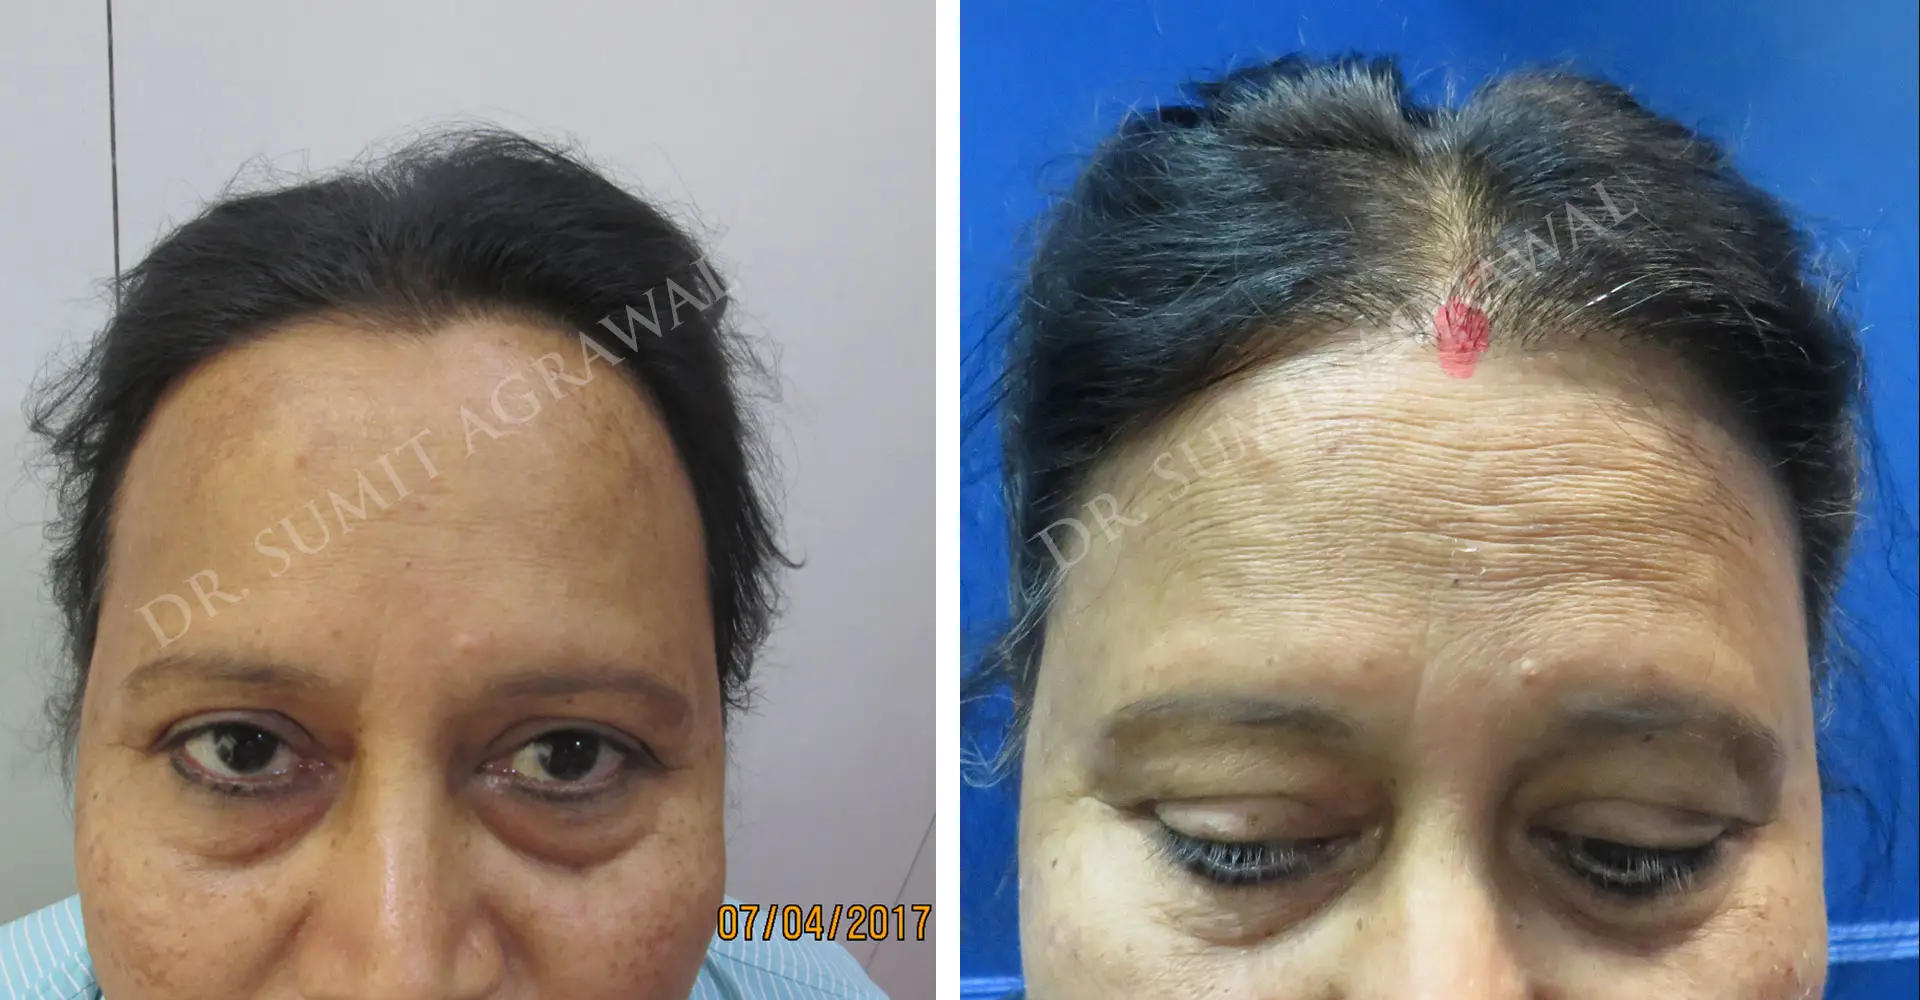 Female Hair Transplant Before and After photos of successful results by Dr. Sumit Agrawal.